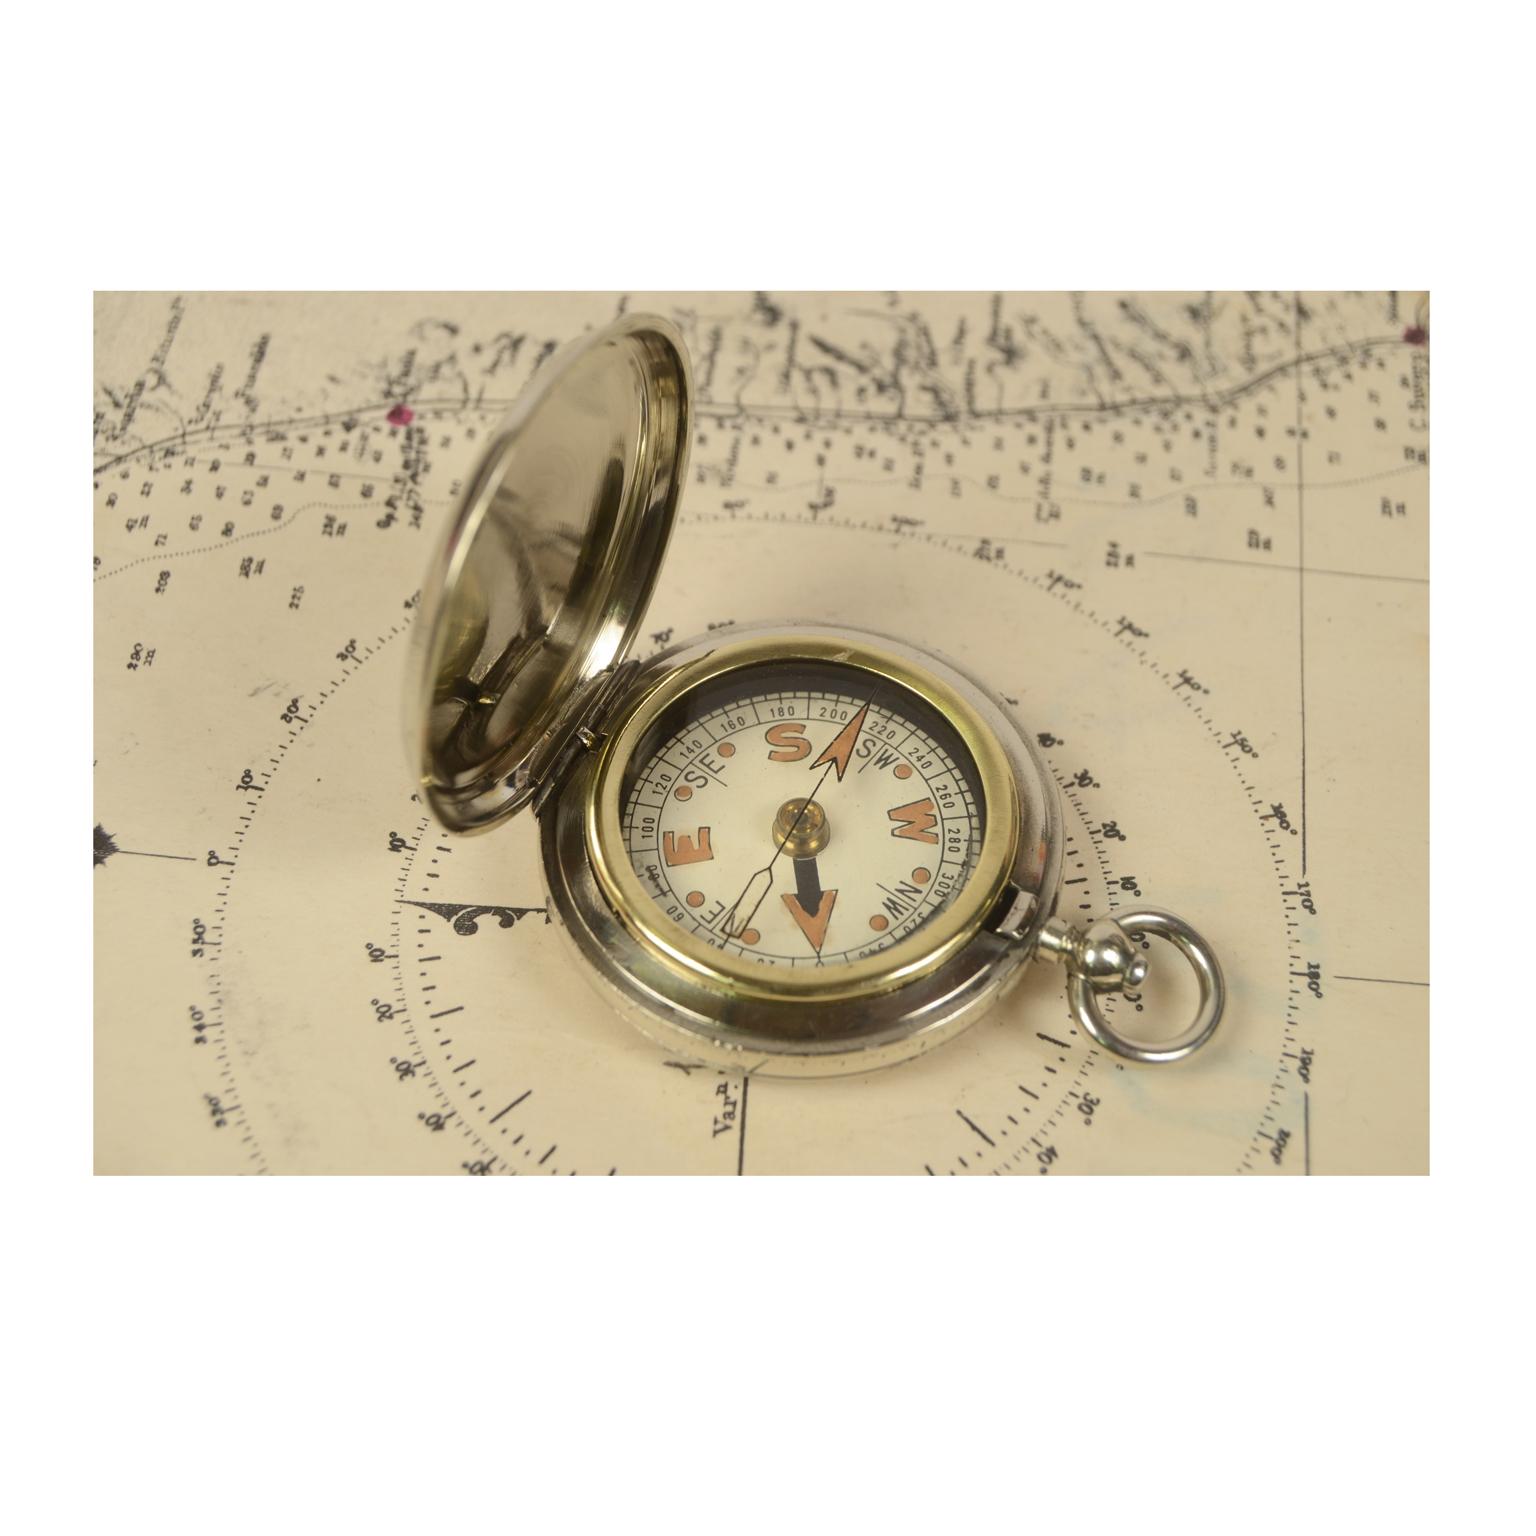 Pocket compass used by the officers of the British Navy during the First World War, made of chromed brass in the shape of a pocket watch. The compass is equipped with a lid with snap closure with release button inside the ring. Eight wind compass